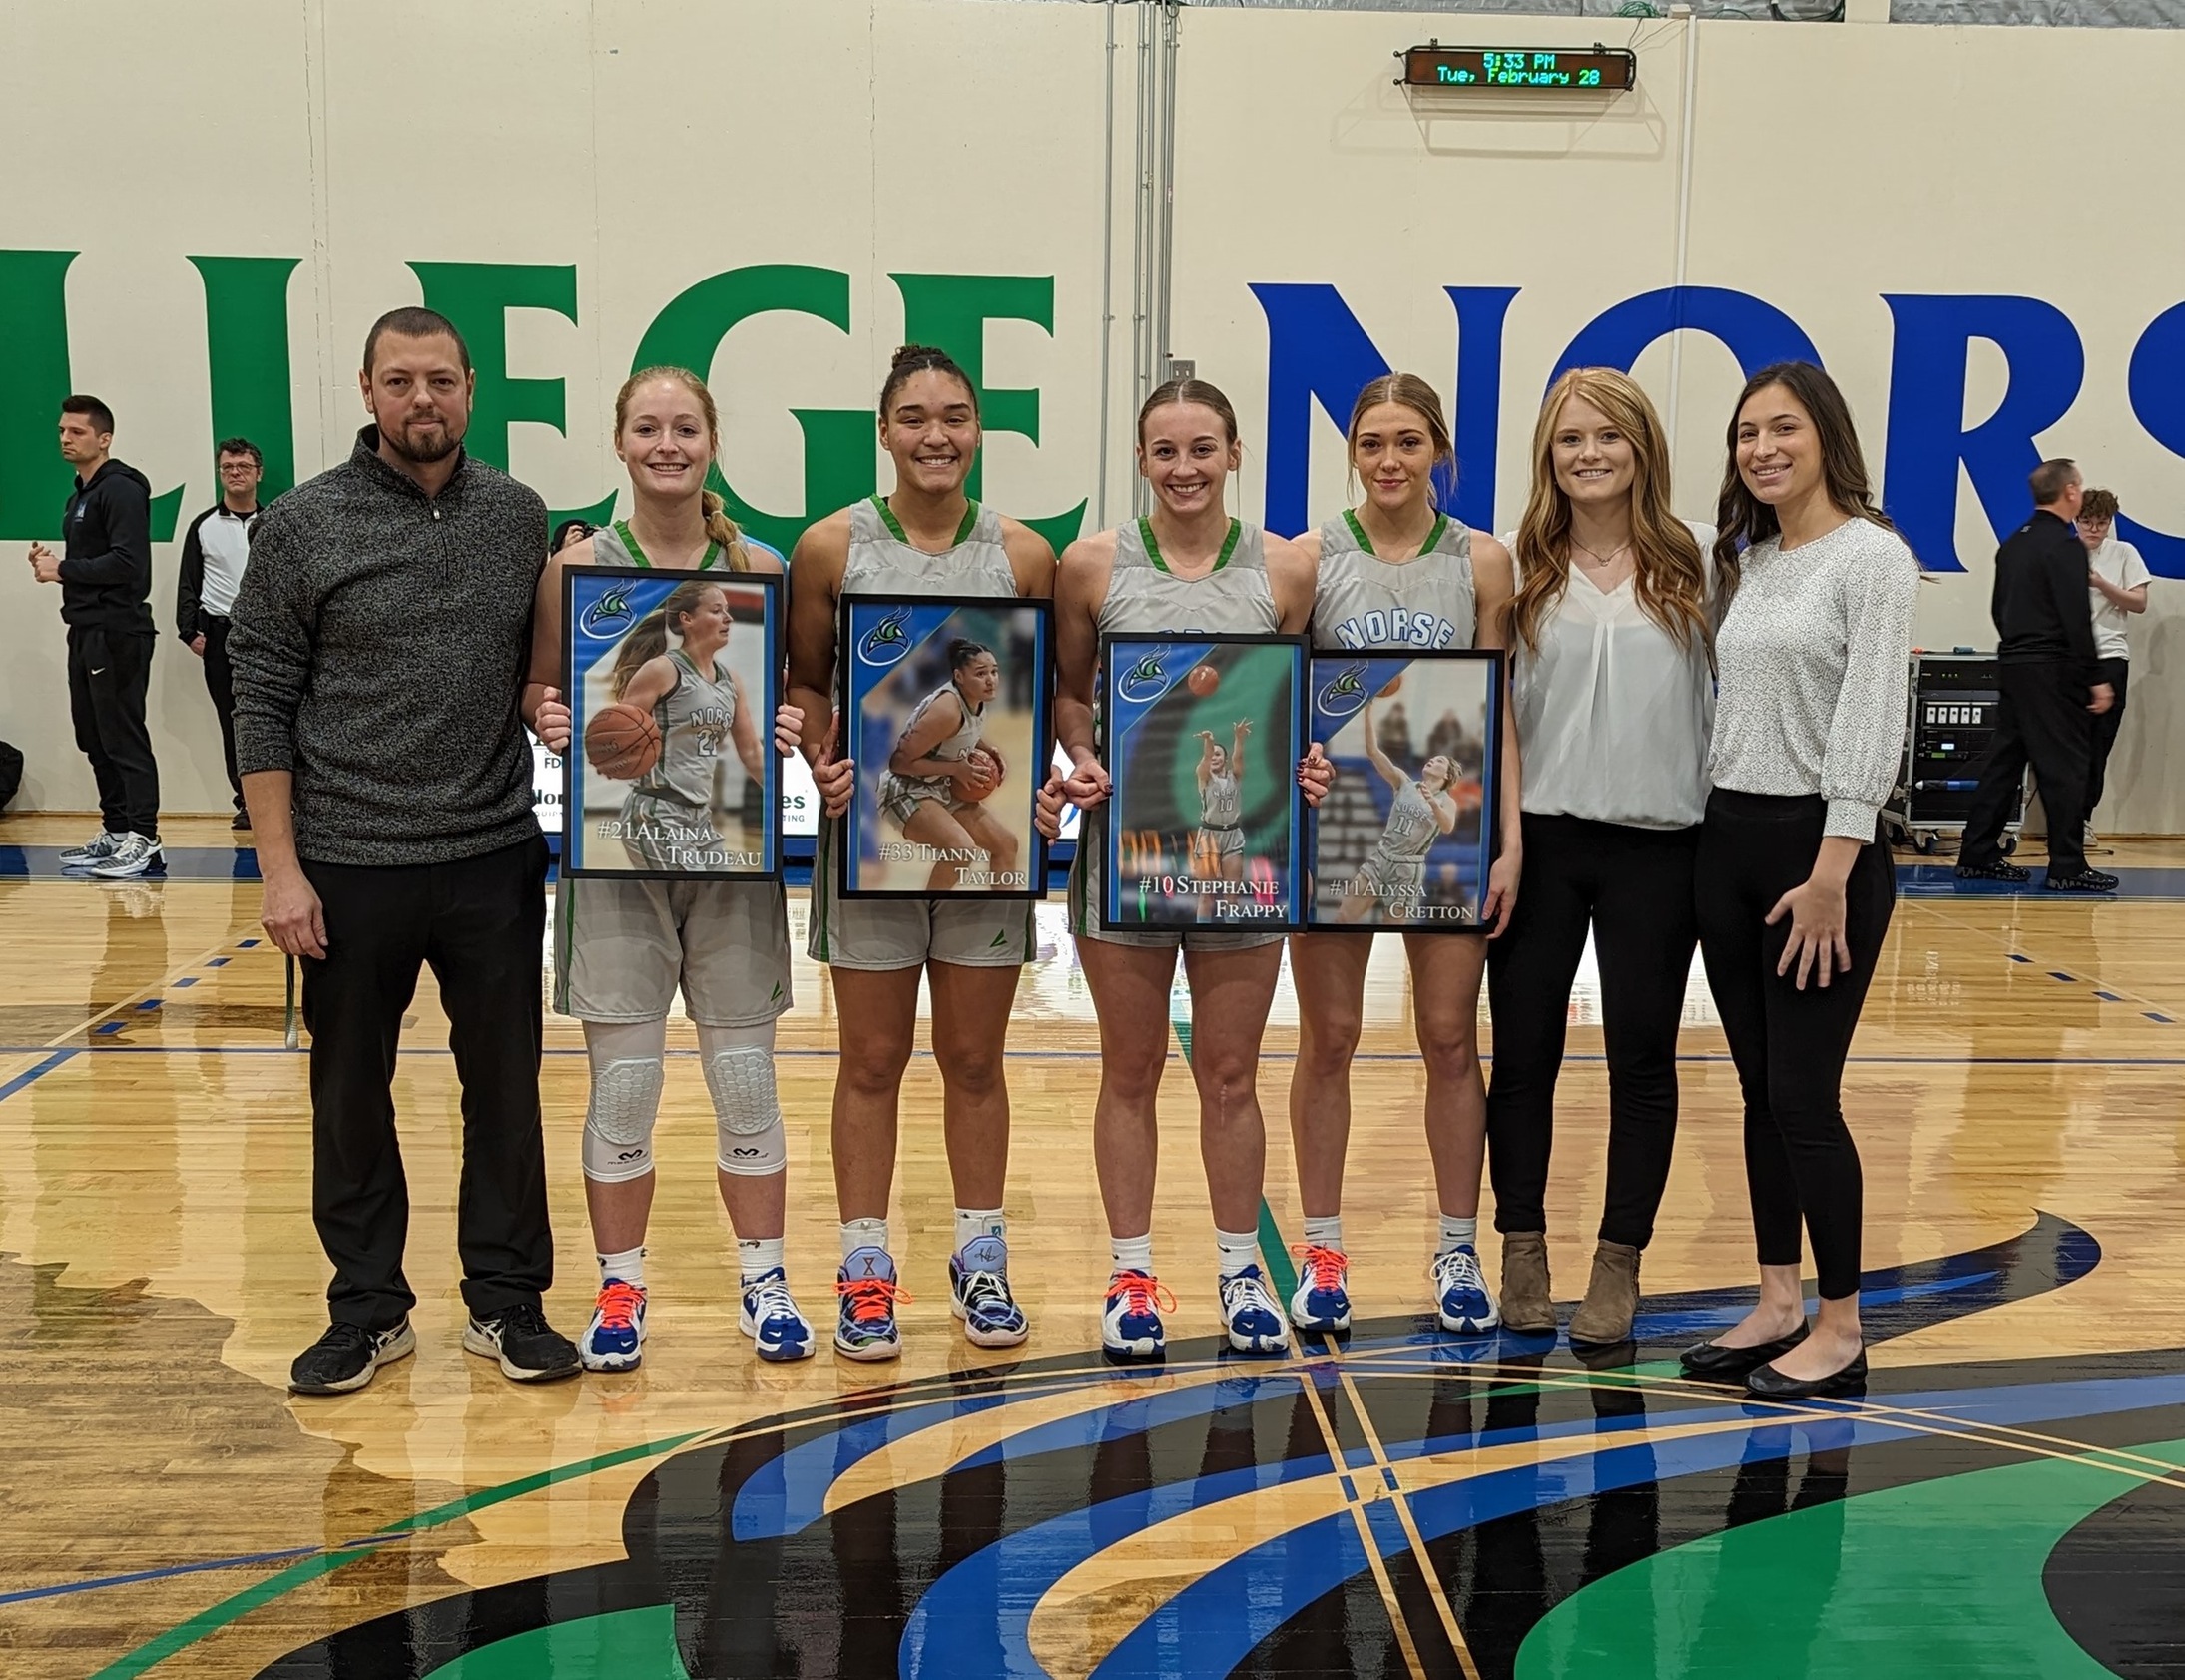 Matt Gregory, Alaina Trudeau, Tianna Taylor, Stephanie Frappy, Alyssa Cretton, Paige Welch, and Kennedy Englund pose at half court, the sophomores show their pictures given as gifts accompanied by the coaching staff.